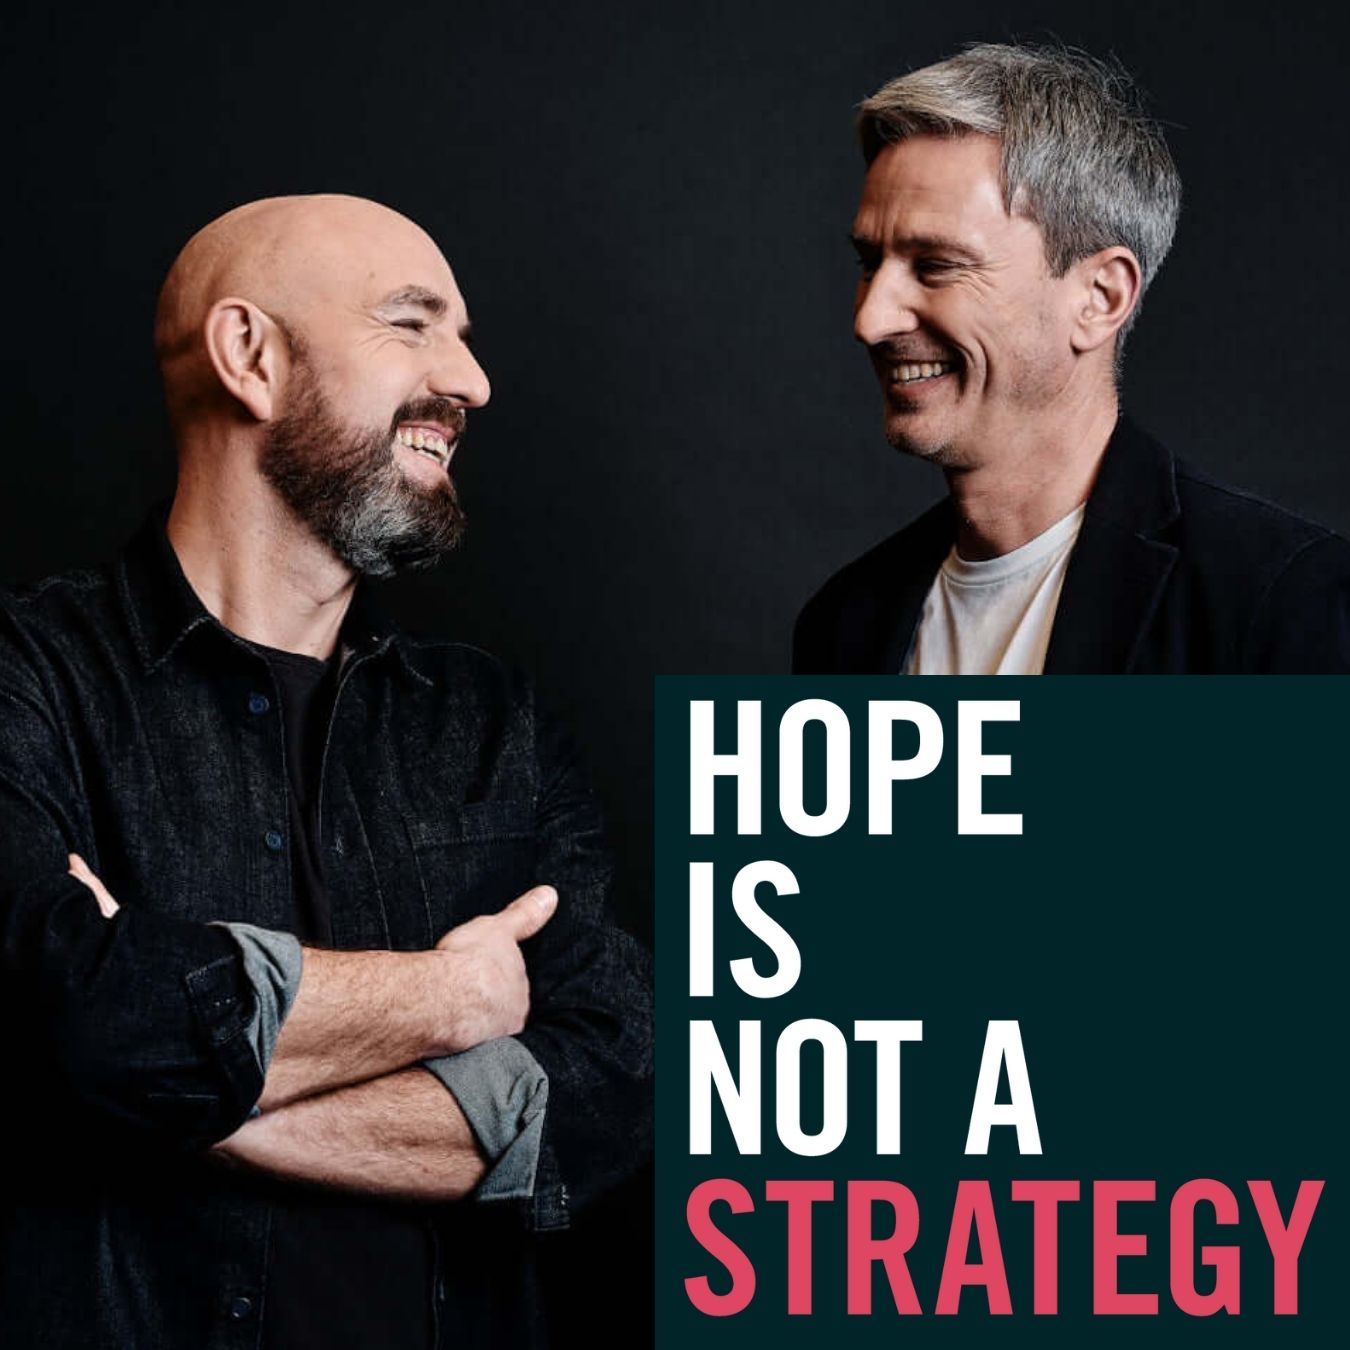 HOPE IS NOT A STRATEGY